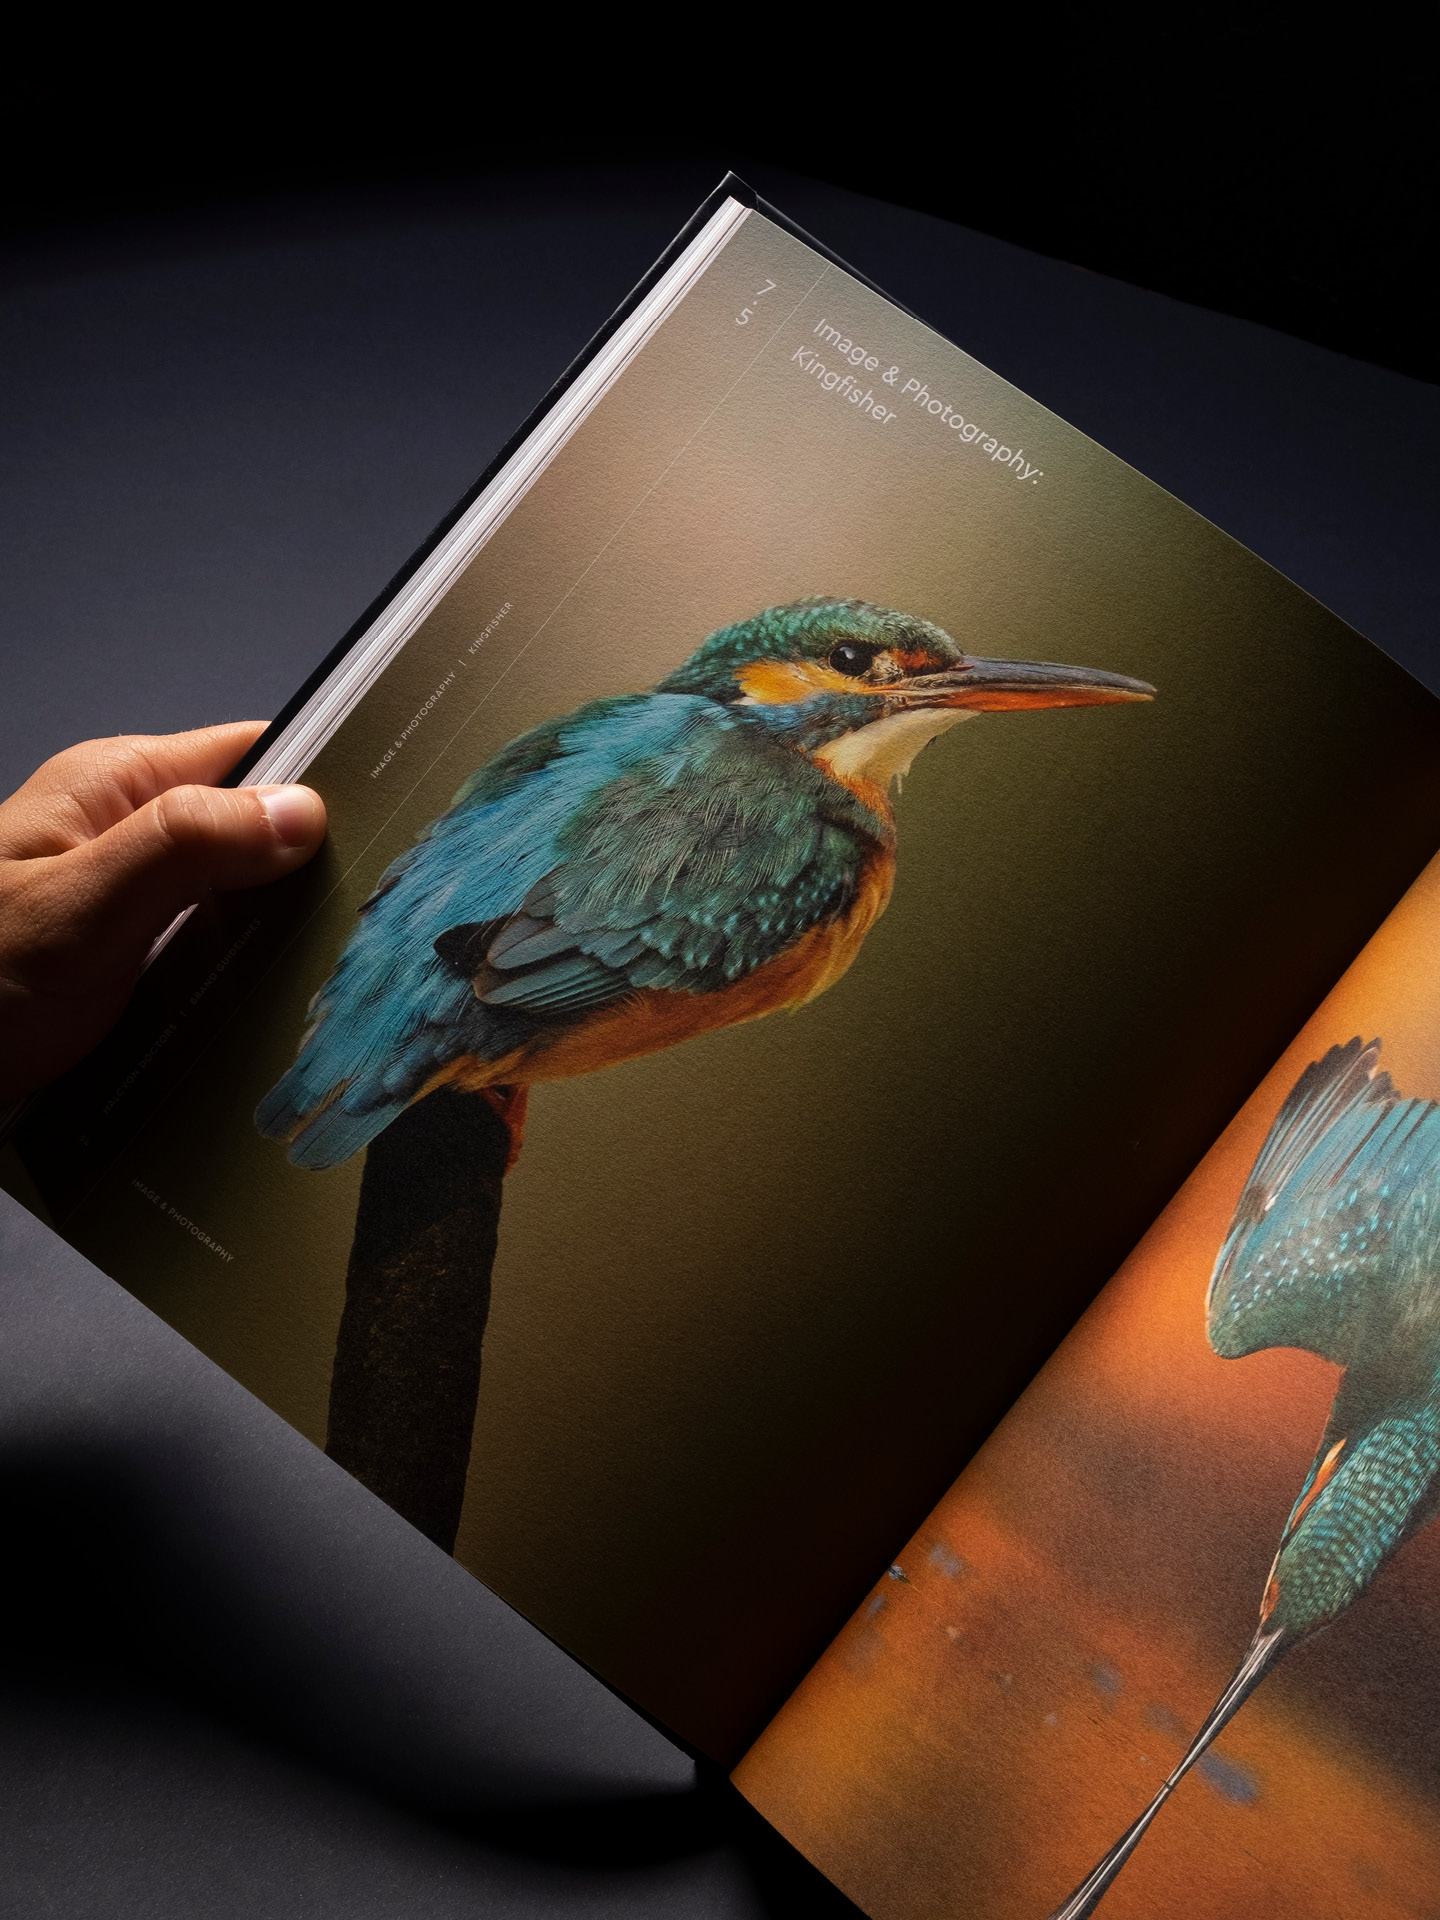 A printed spread from the Halcyon Doctors brand guidelines showcasing two pictures of kingfishers